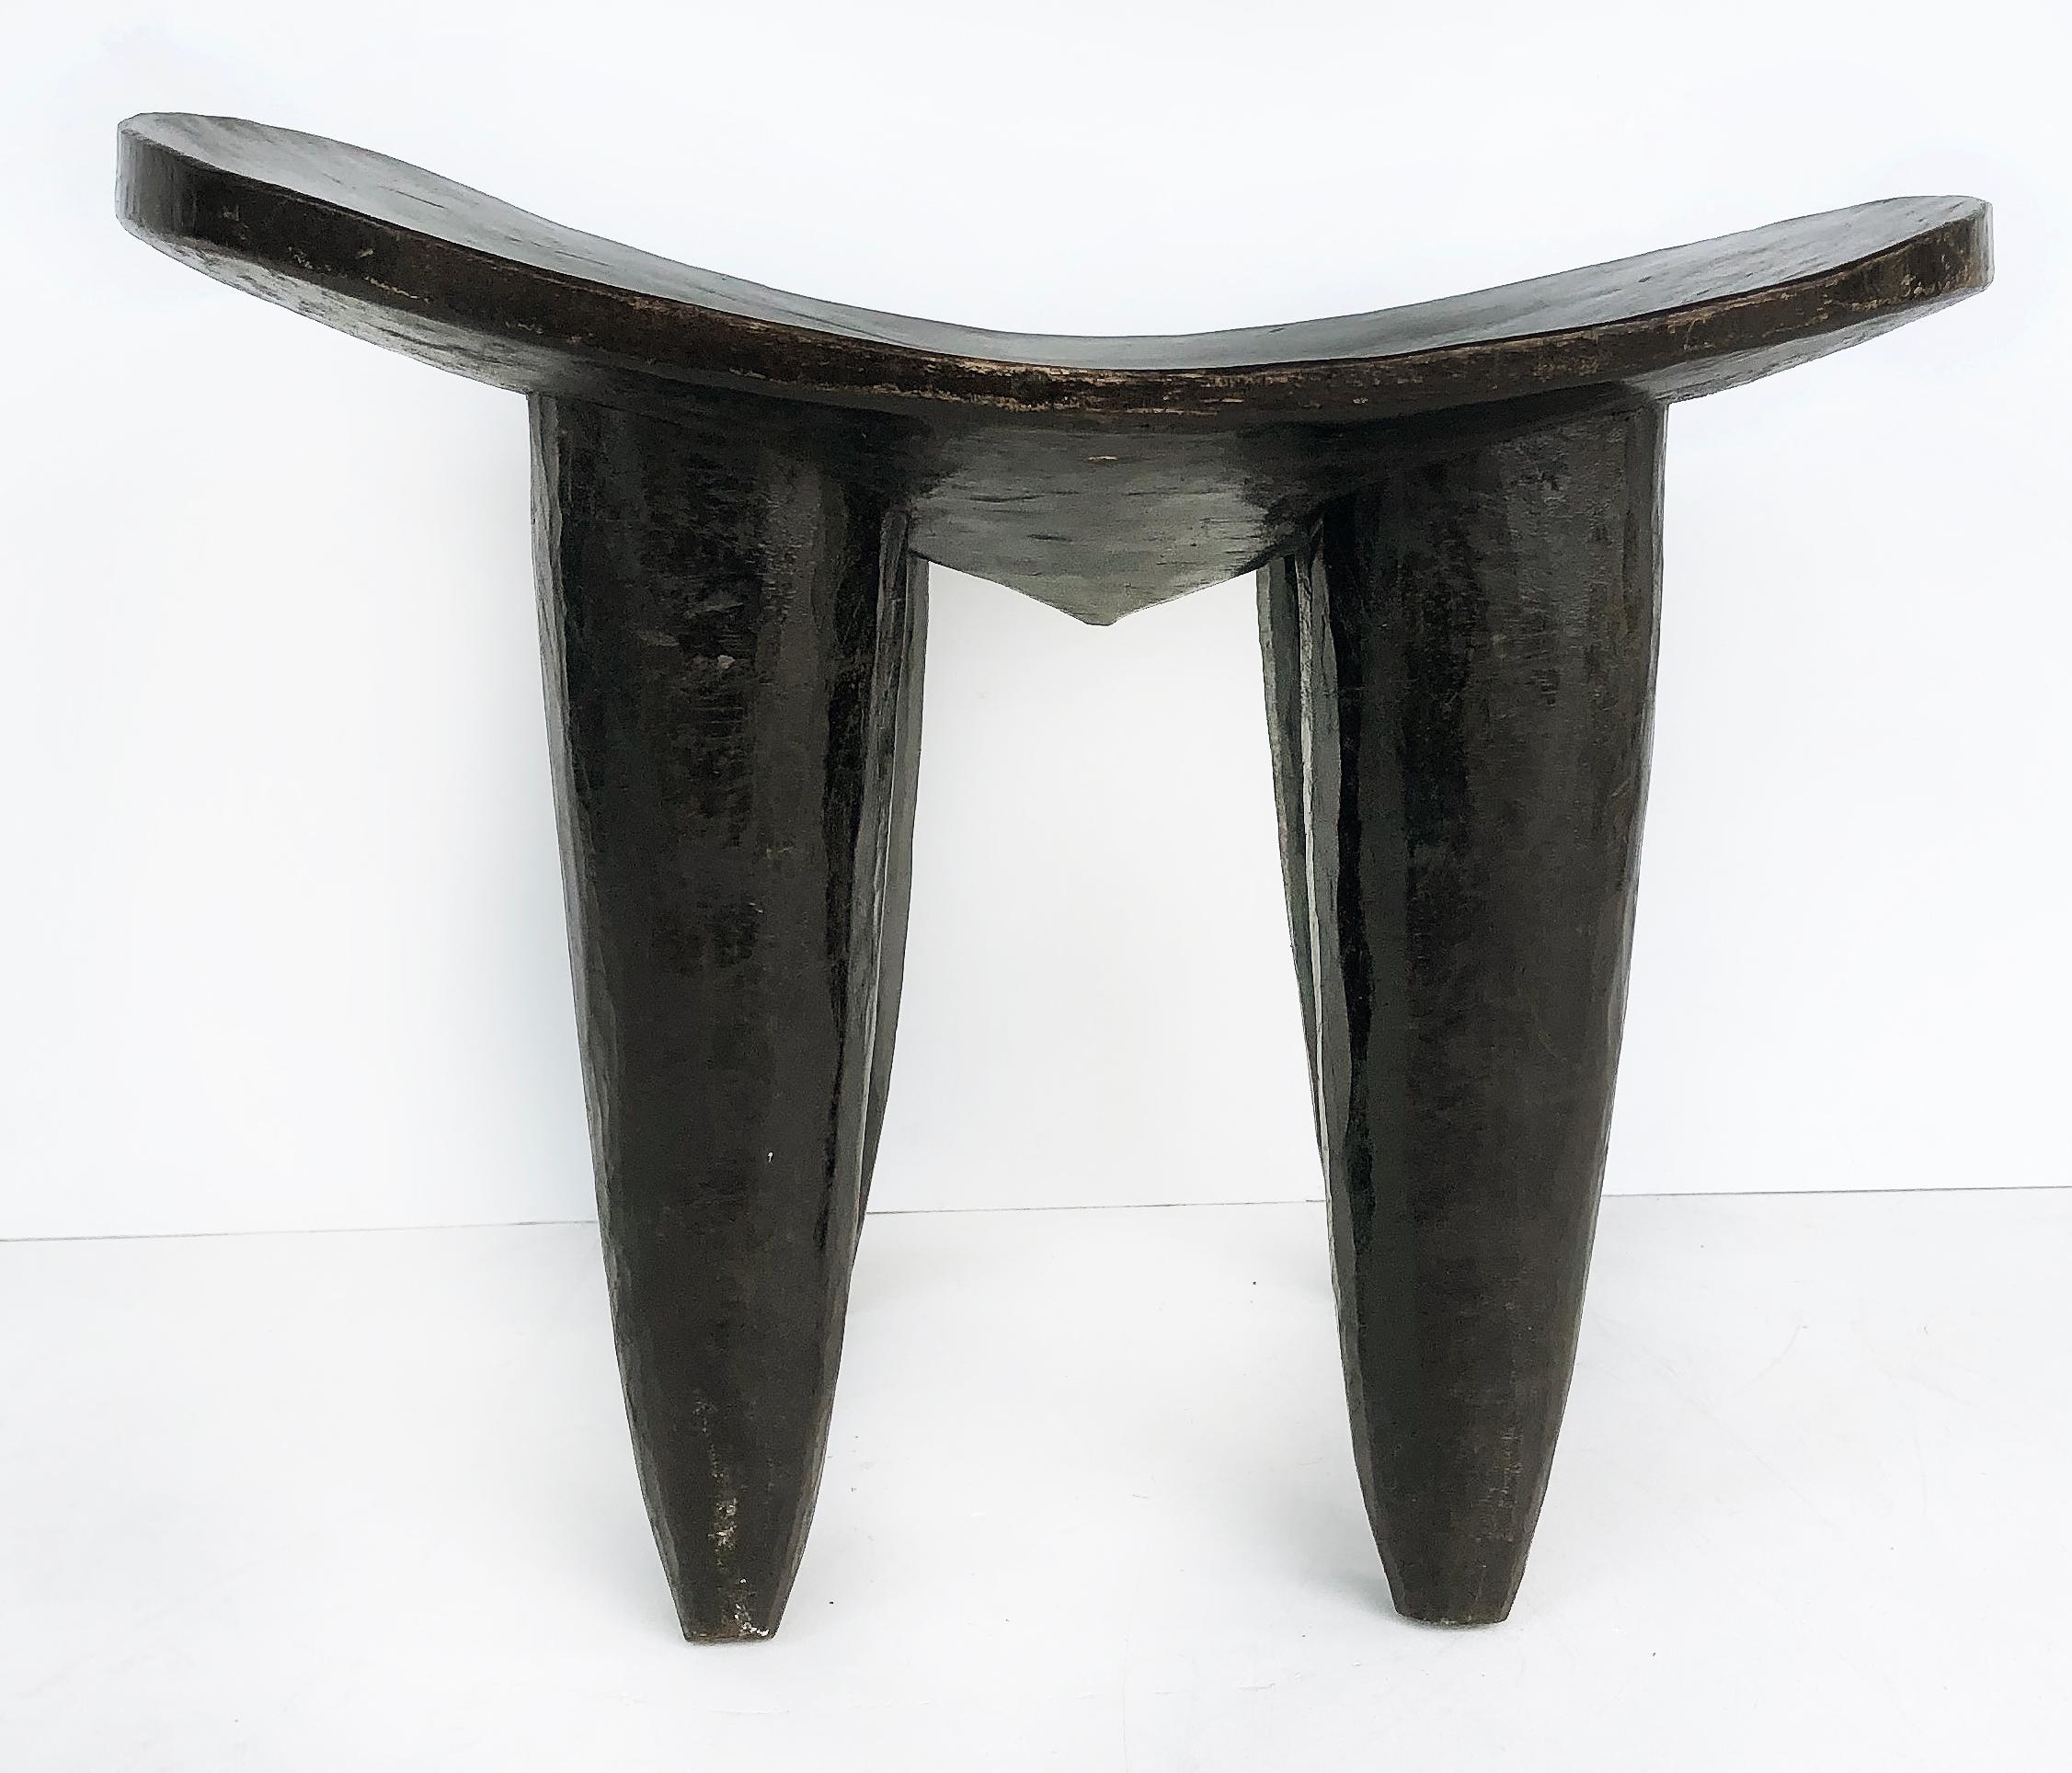 Offered for sale is an African Cote d'Ivoire Senufo four legged tribal stool.

African hand carved Senufo Stool from Cote d'Ivoire


Offered for sale is a 20th-century hand-carved Senufo stool from Cote d'Ivoire. The stool is stable and quite